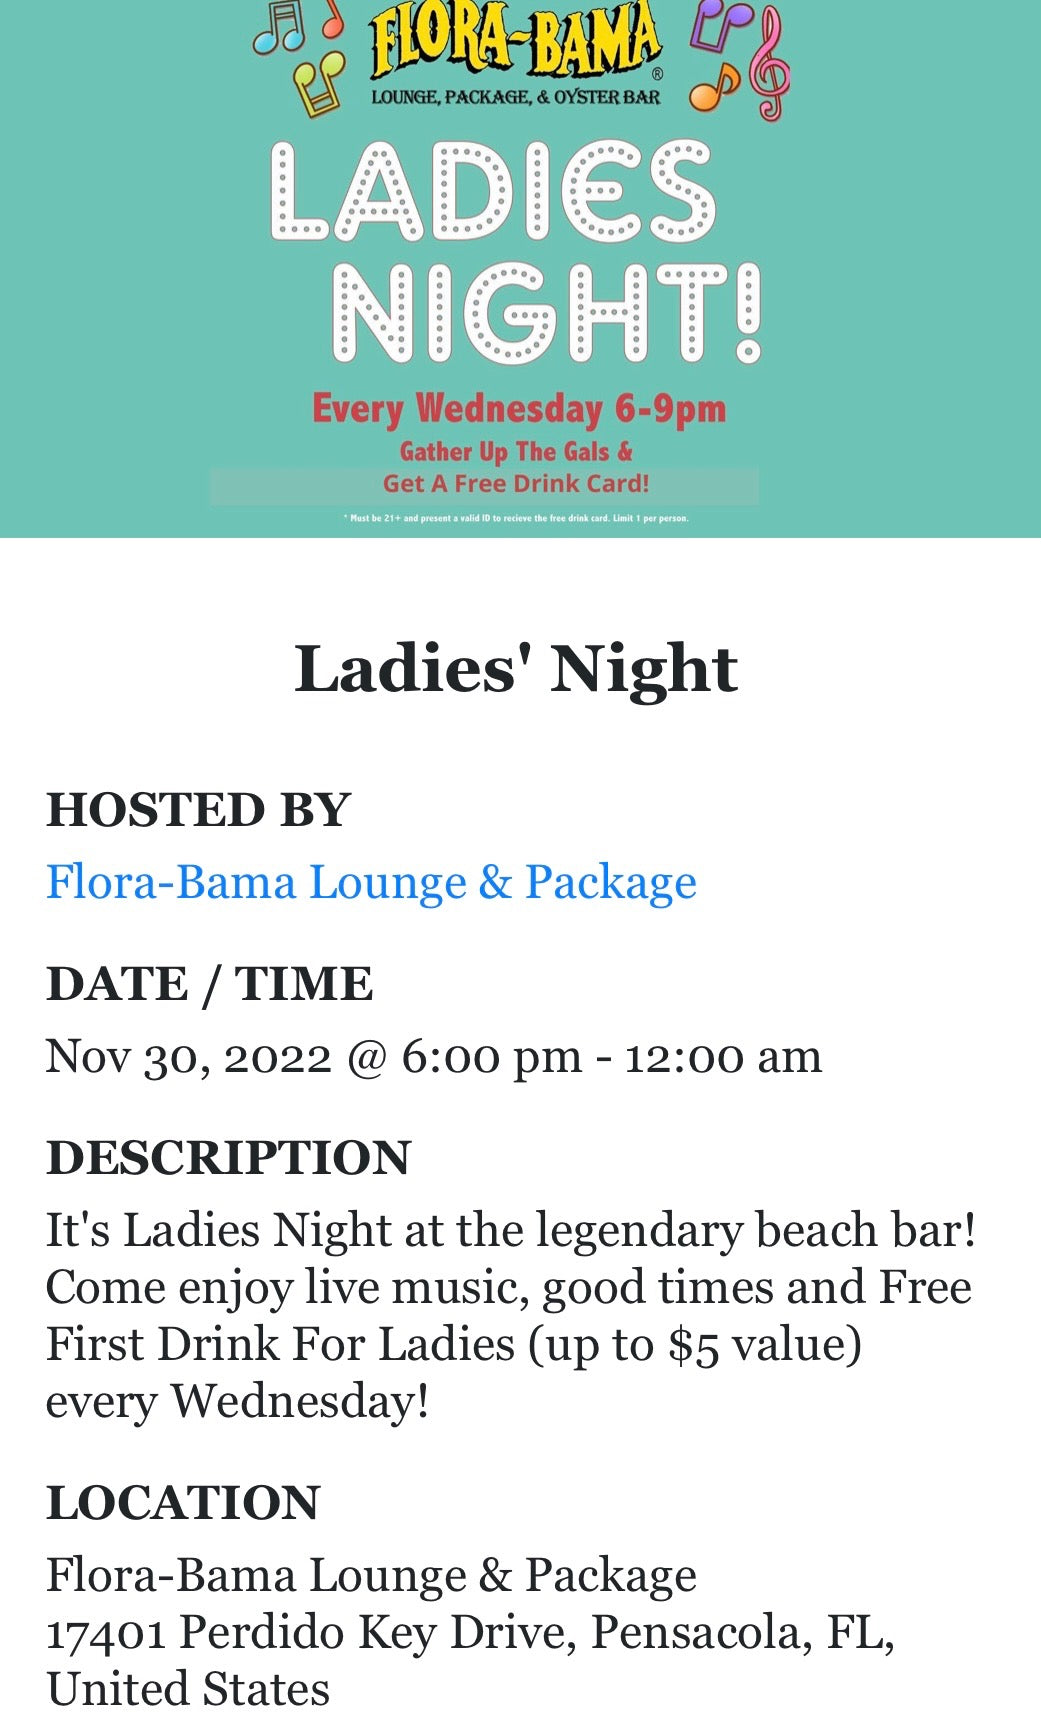 Party Bus Shuttle to Flora-Bama on  Nov 30 2023 for Ladies Night